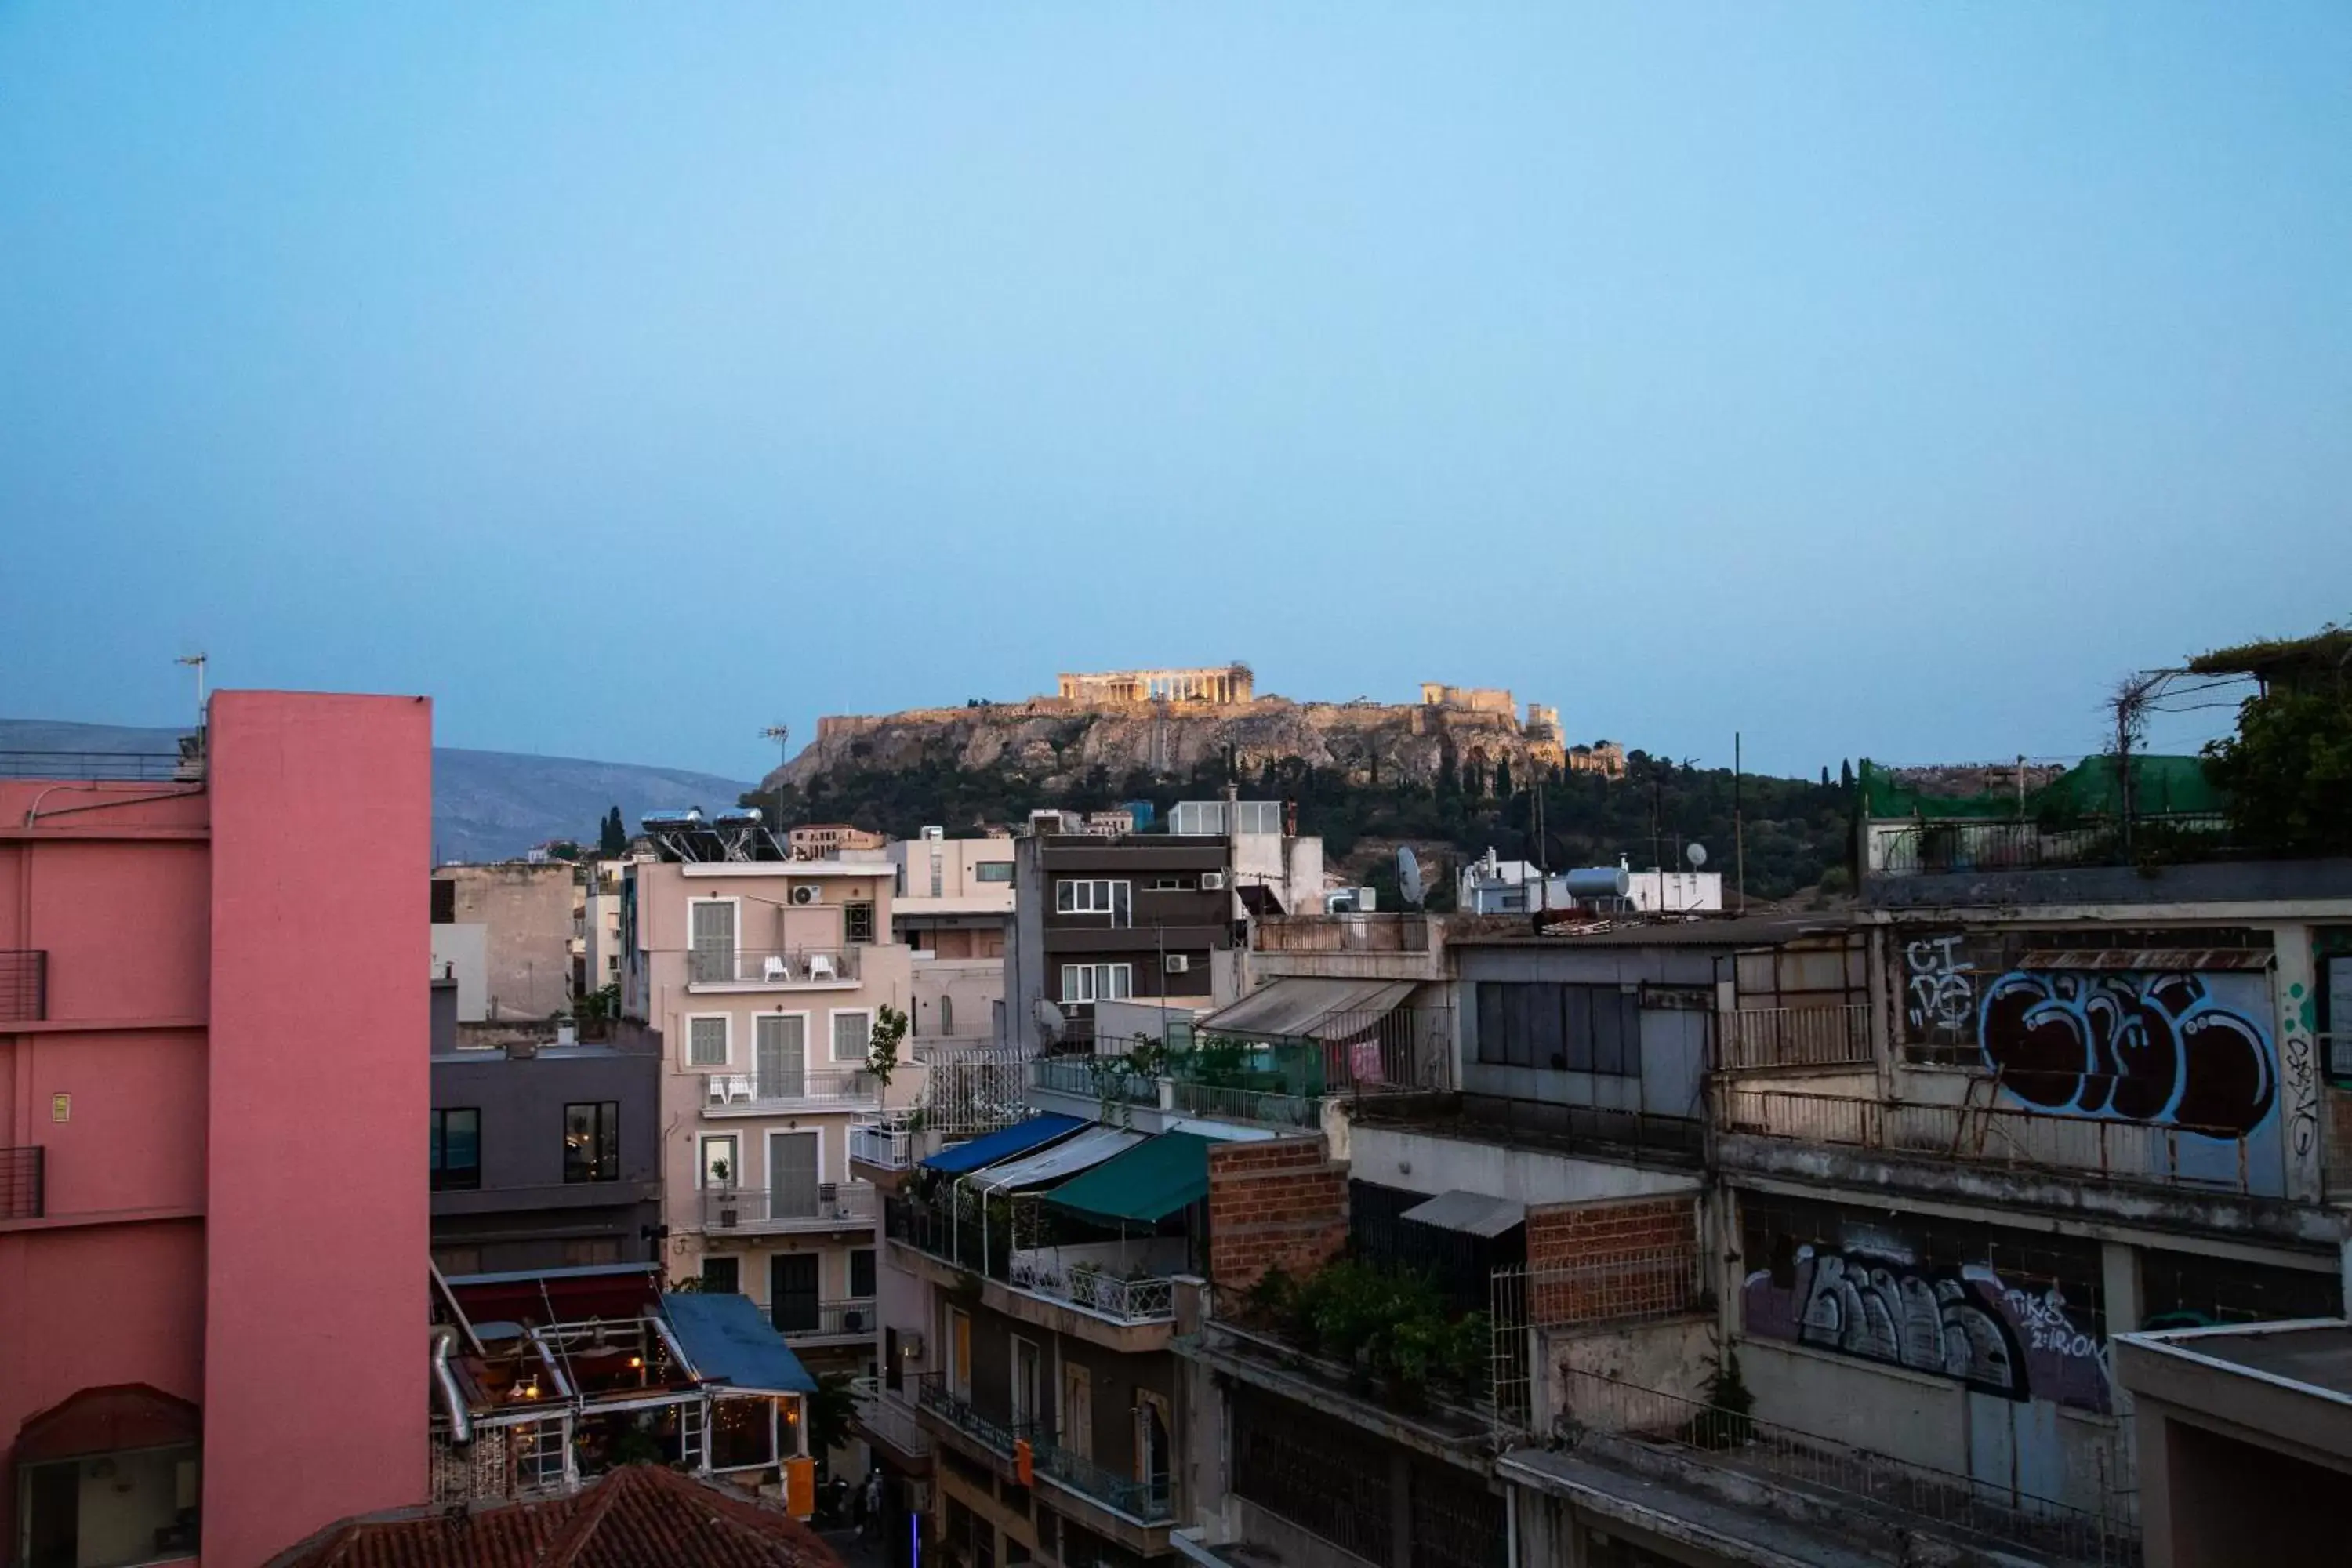 Neighbourhood in Downtown Athens Lofts - The Acropolis Observatory